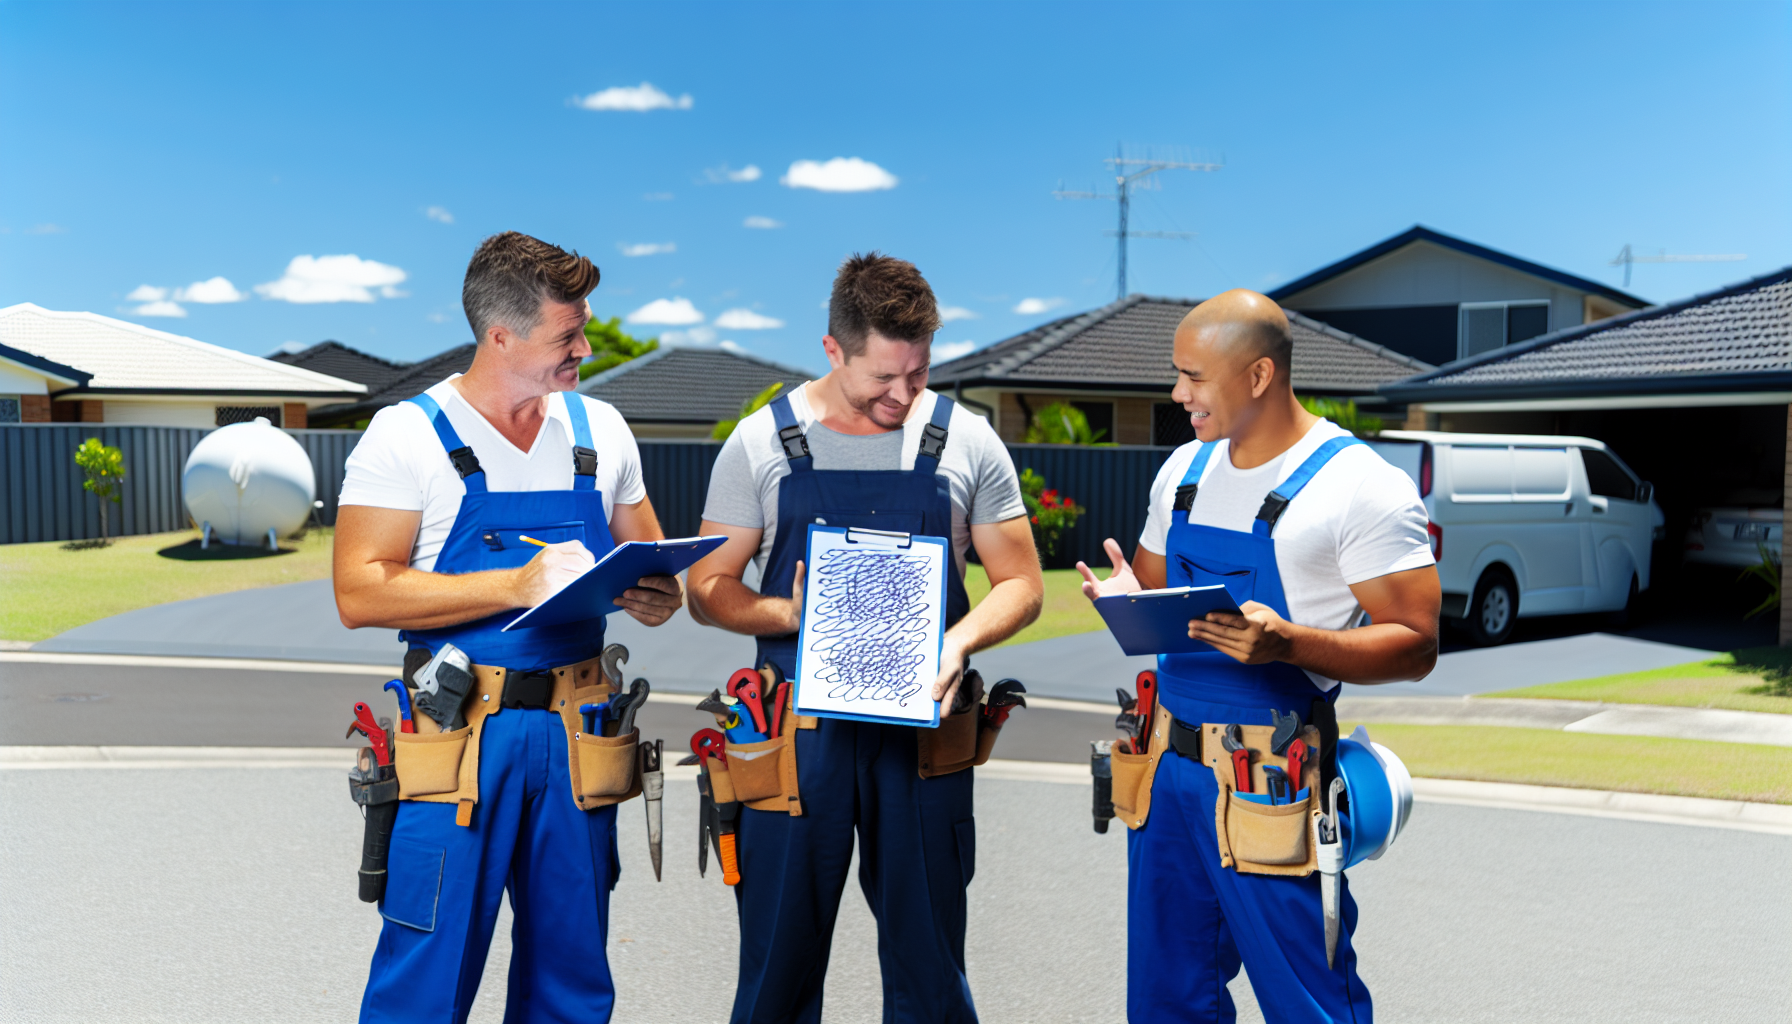 Three plumbers discussing quotes - best plumbers in Brisbane 3 free quotes